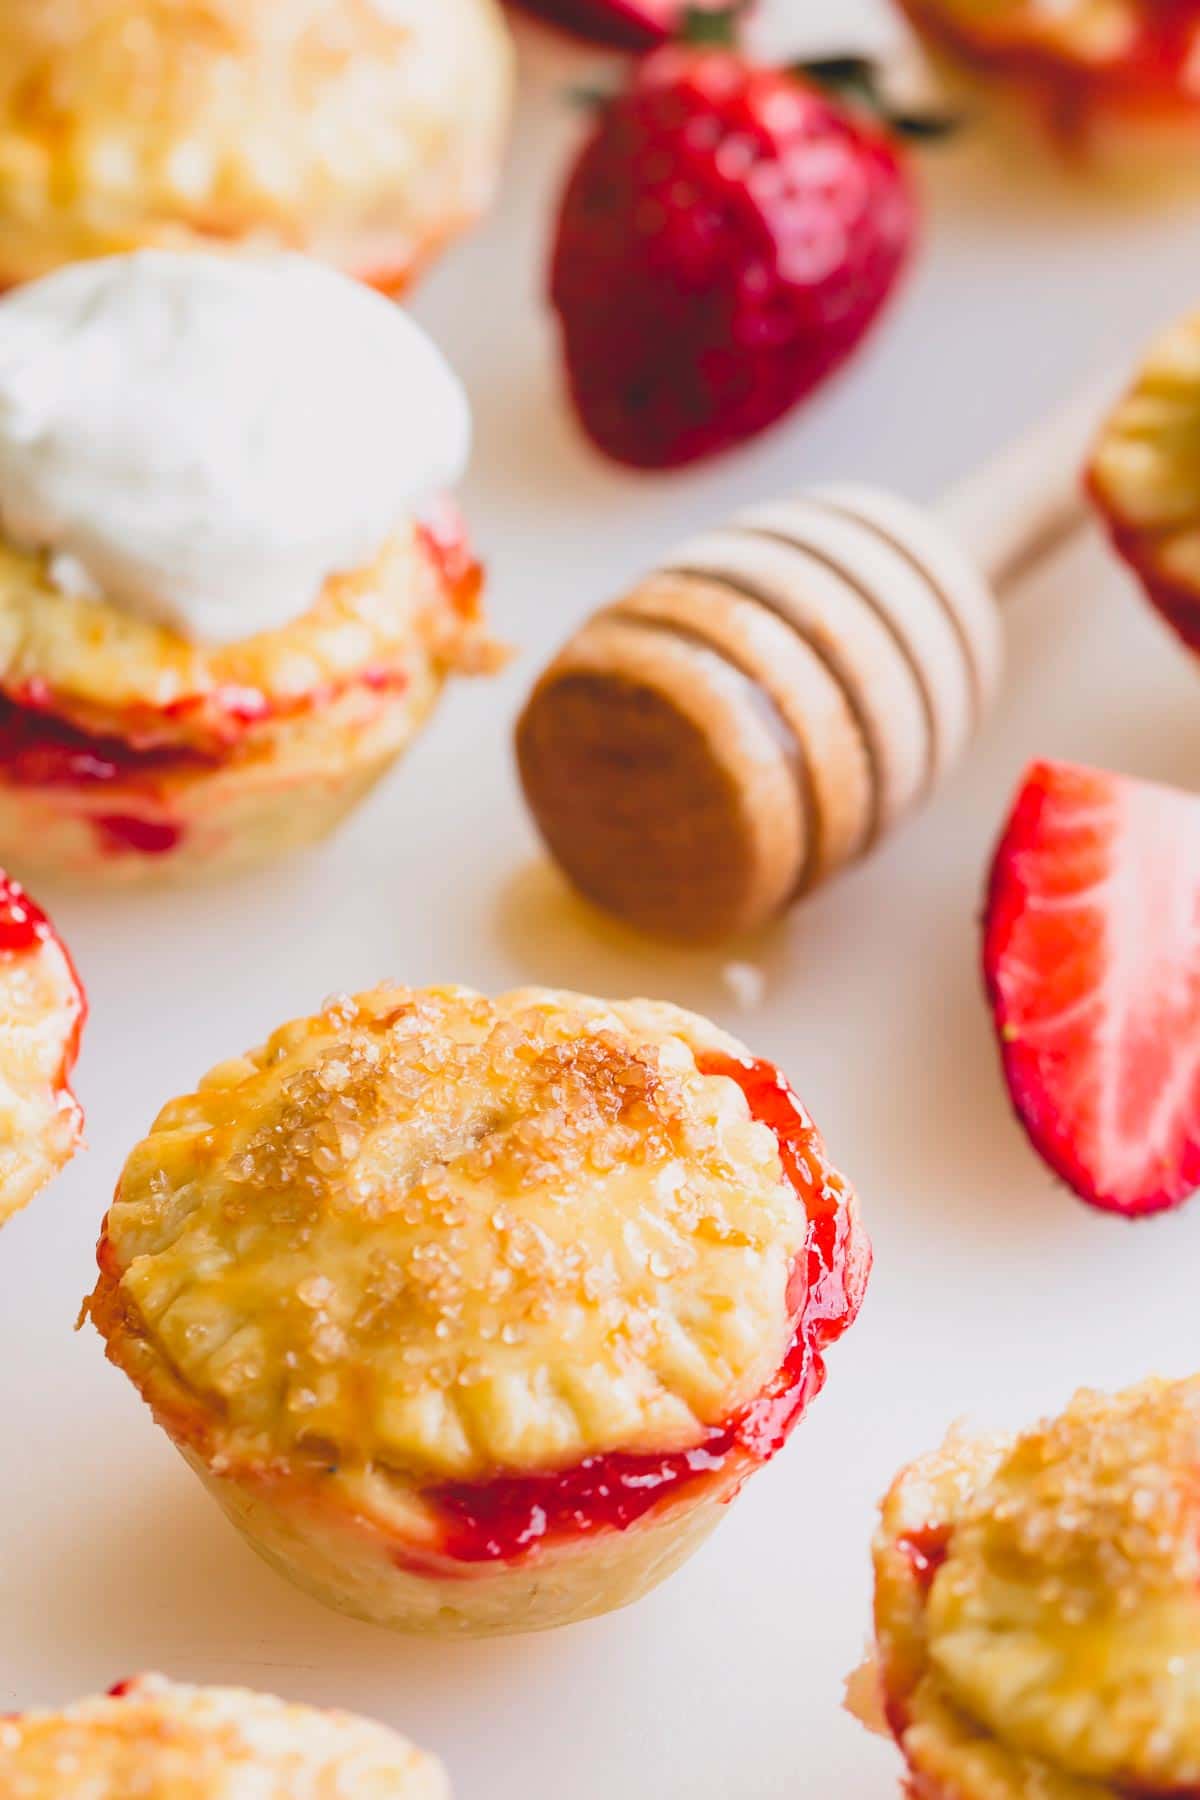 Mini strawberry pies on a white surface with a honey dipper.